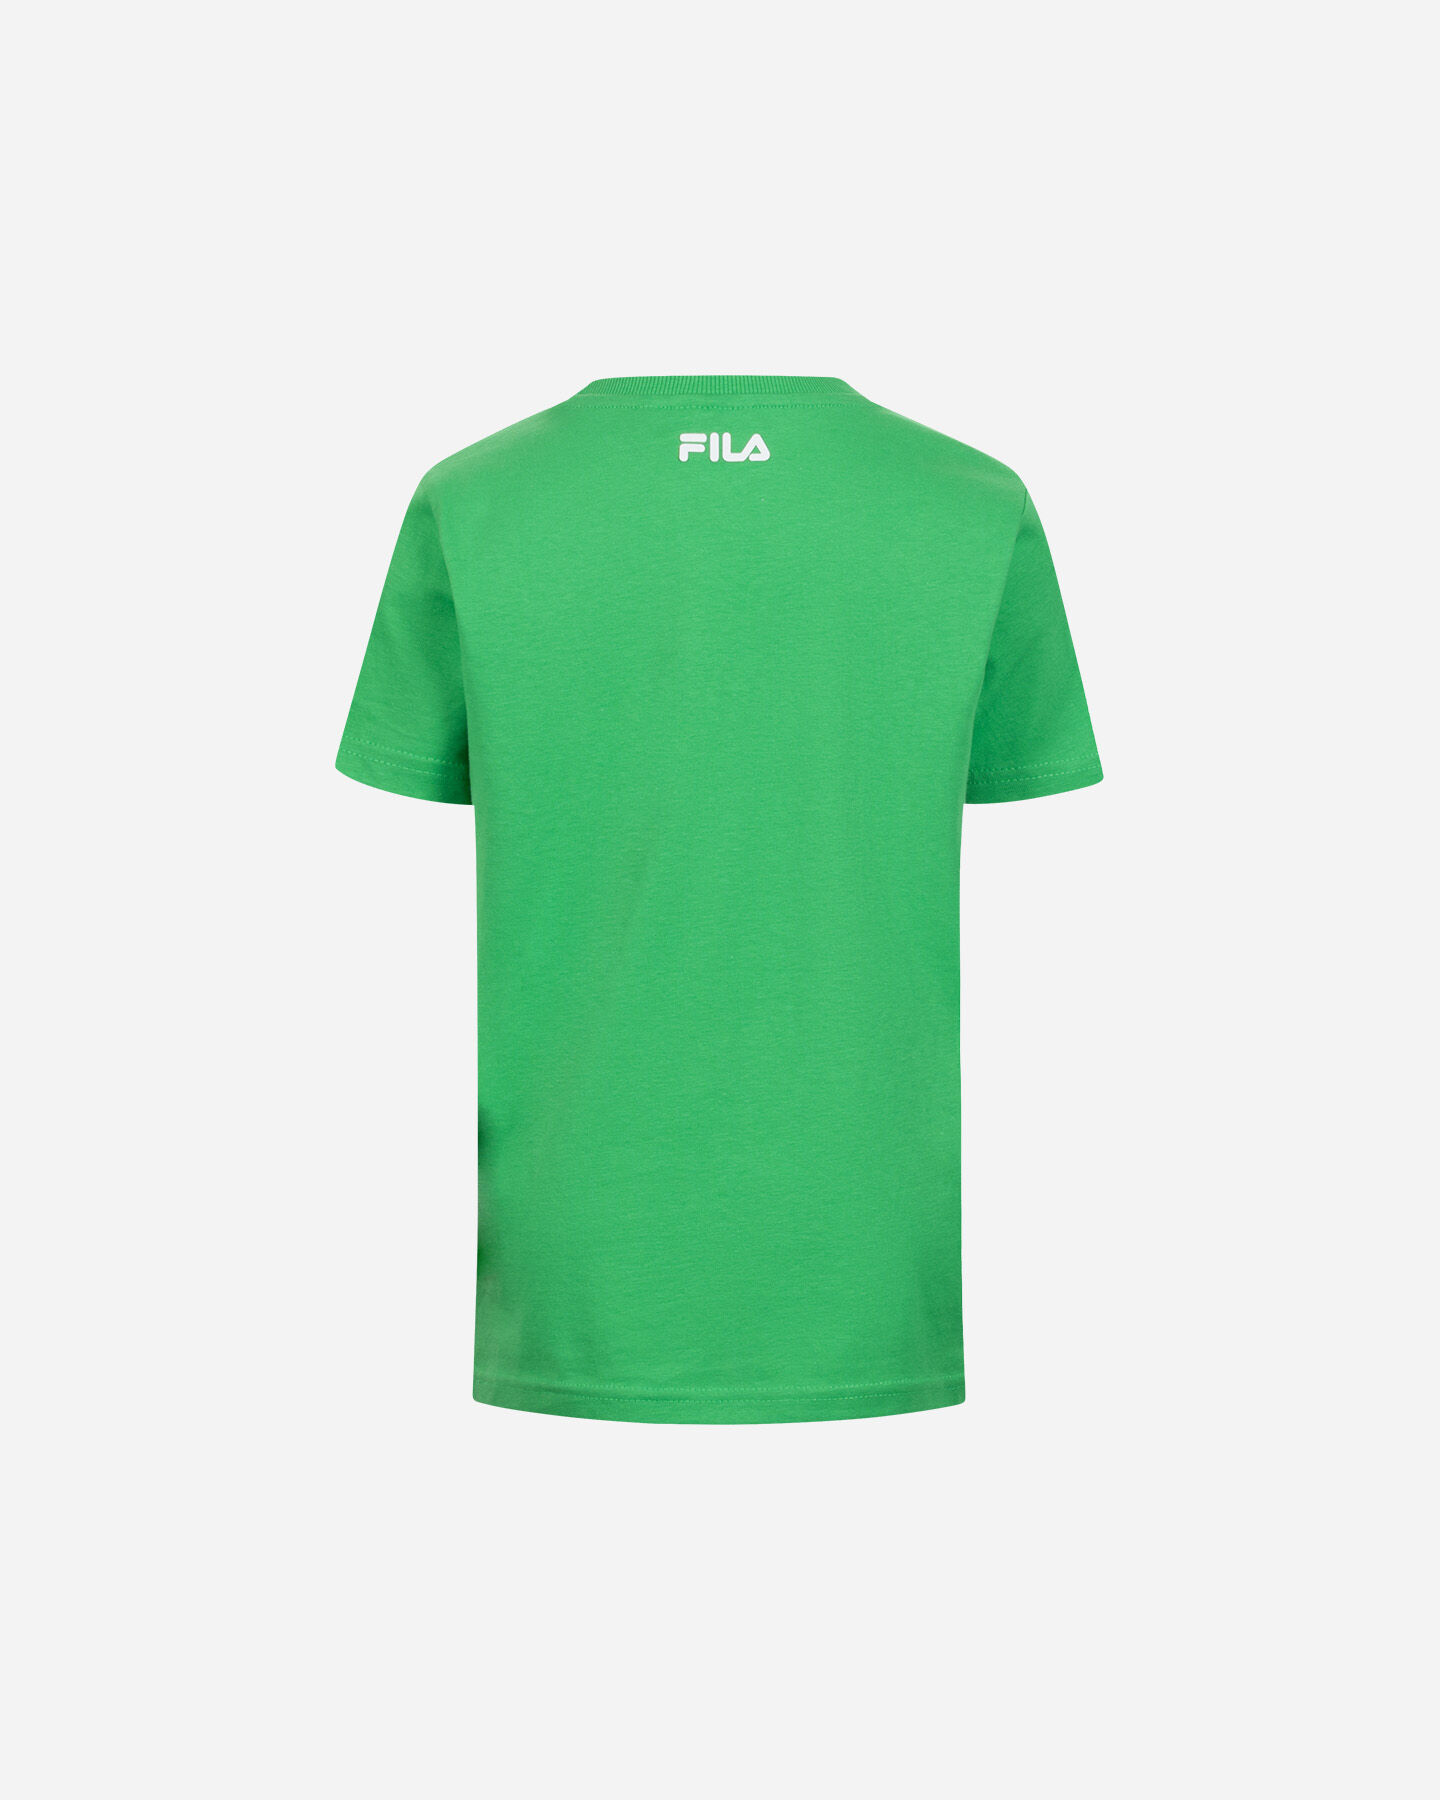  T-Shirt FILA FUNNY POP COLLECTION JR S4130060|750|6A scatto 1